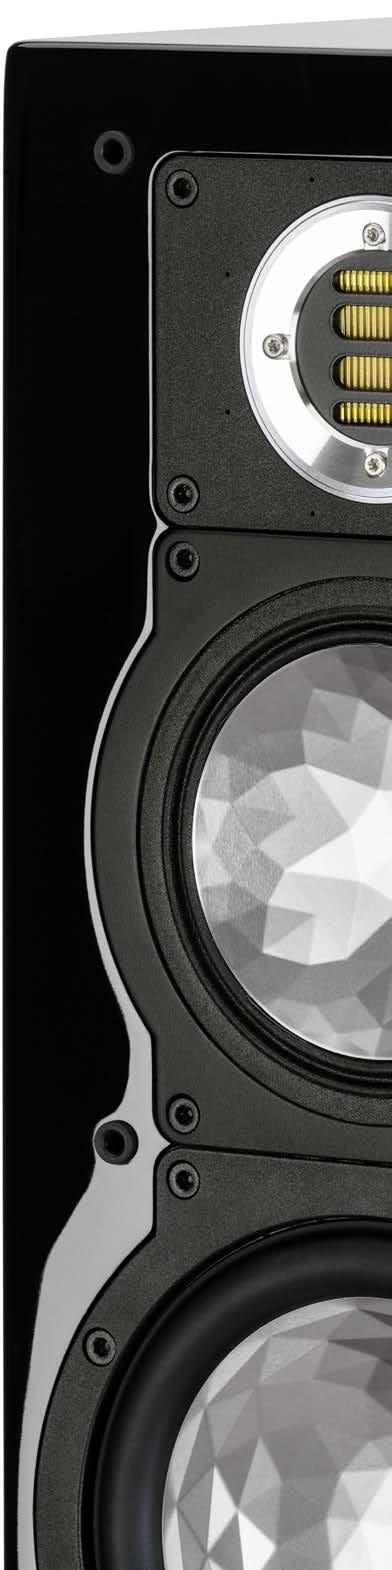 CC 241.2 As the focal point in a surround-sound system, the center speaker is undoubtedly its most important voice.